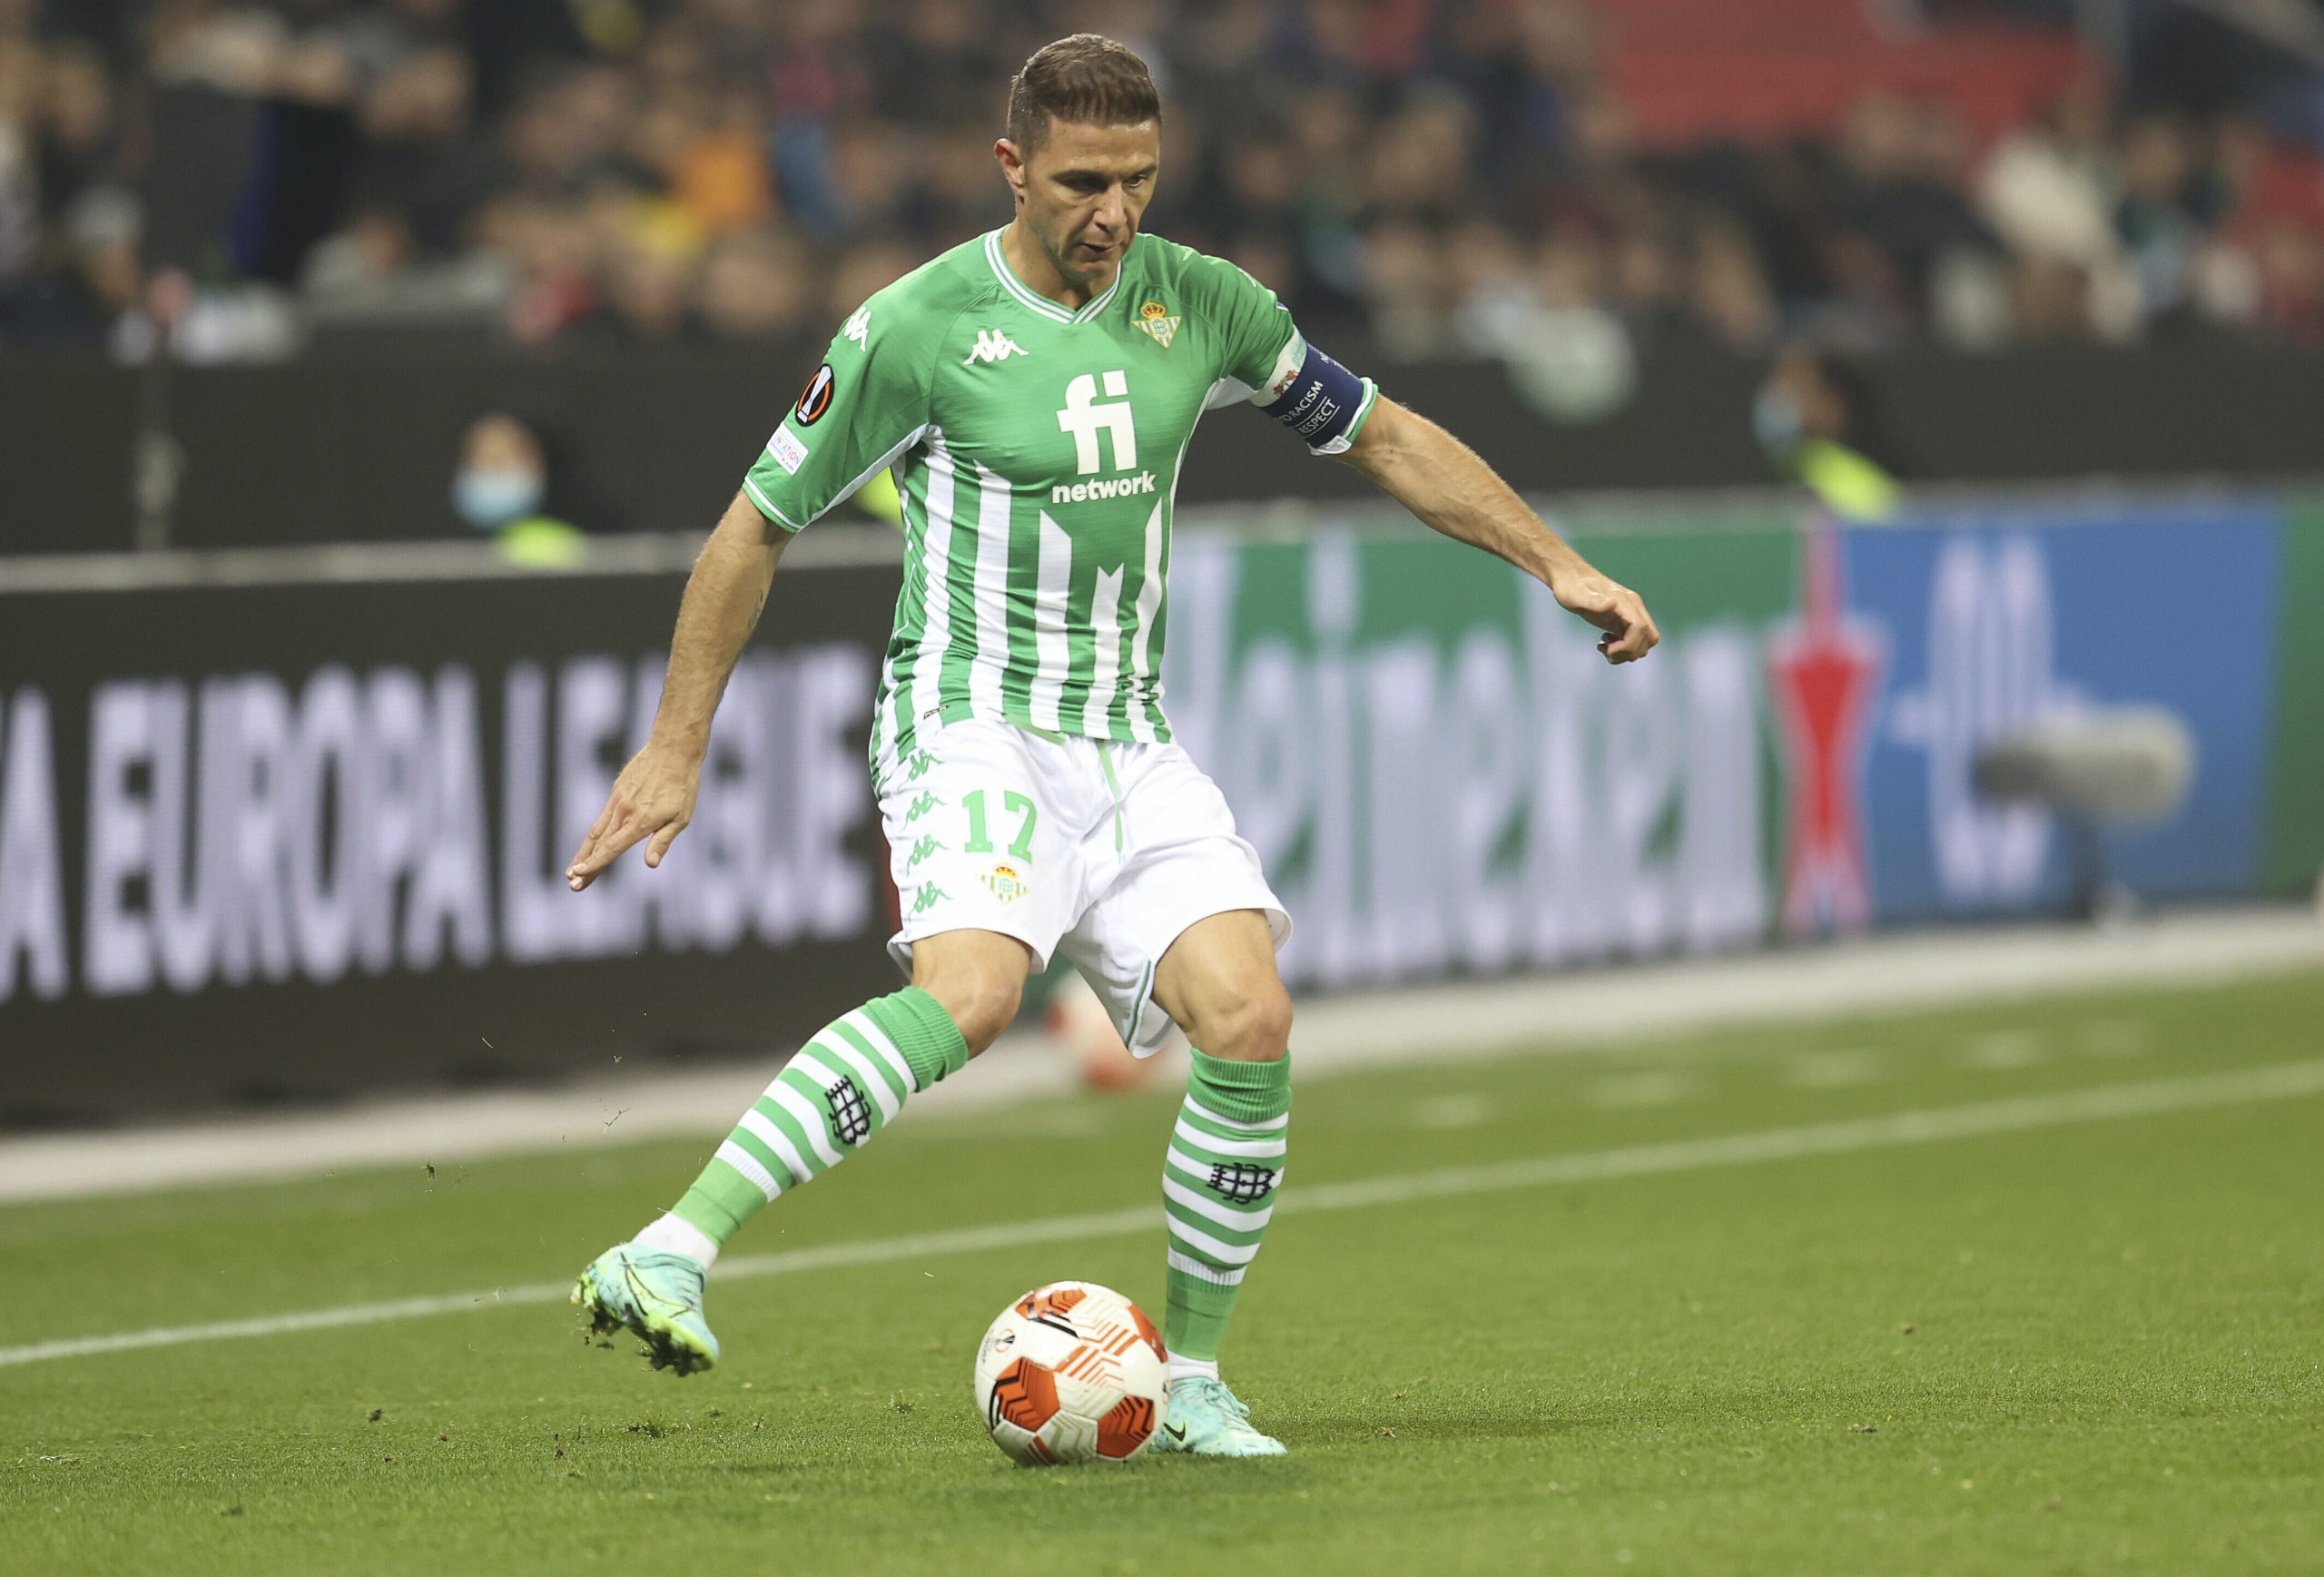 firo: 04.11.2021, Fuvuball, UEFA Europa League, league, EL season 2021/2022, group stage, Bayer Leverkusen - Real Betis Sevilla 3: 0 Joaquv? n, Joaquin, individual action Photo by: Jvºrgen Fromme/picture-alliance/dpa/AP Images